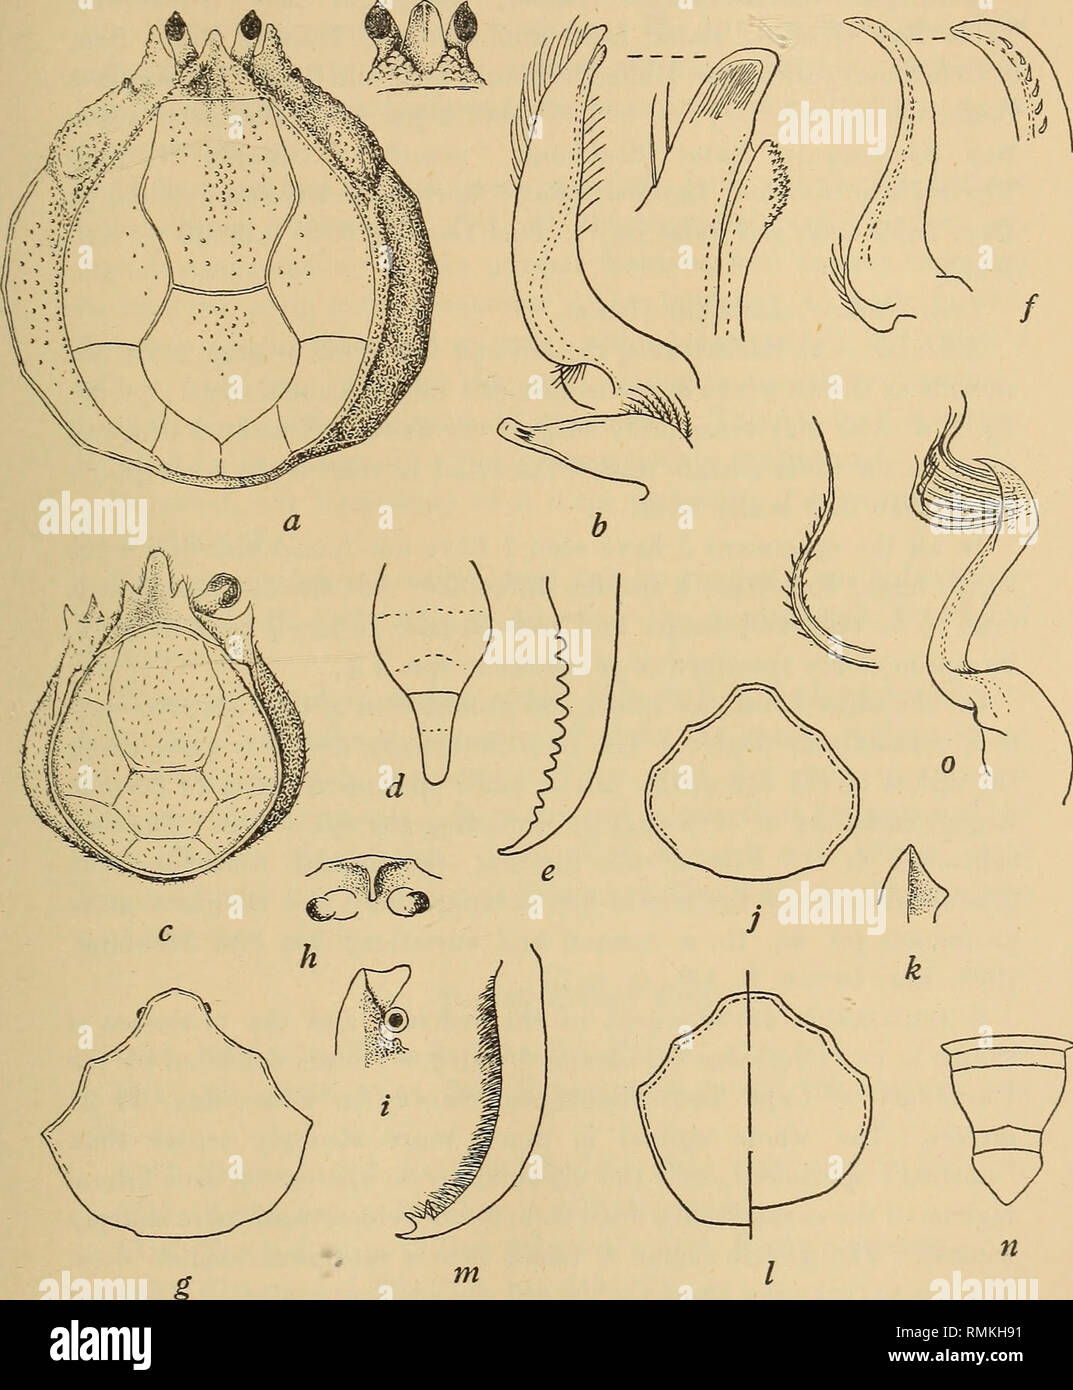 . Annals of the South African Museum = Annale van die Suid-Afrikaanse Museum. Natural history. Descriptive Catalogue of South African Decapod Crustacea. 69. Fig. 15.—Hymenosoma orbiculare Desm. a, carapace, with variation of rostrum. b, 1st and 2nd pleopods &lt;J, apex of former further enlarged. Ehynchoplax bovis Brnrd tooth, d, abdomen of &lt;£. c, carapace, left eye omitted to show infra-orbital e, dactyl of walking leg, plumose setae omitted. /, 1st pleopod $. g, carapace of $ (Zululand). h, i, ventral and lateral j, carapace of $ (Port Alfred). k, lateral view of rostrum of this $. I, car Stock Photo